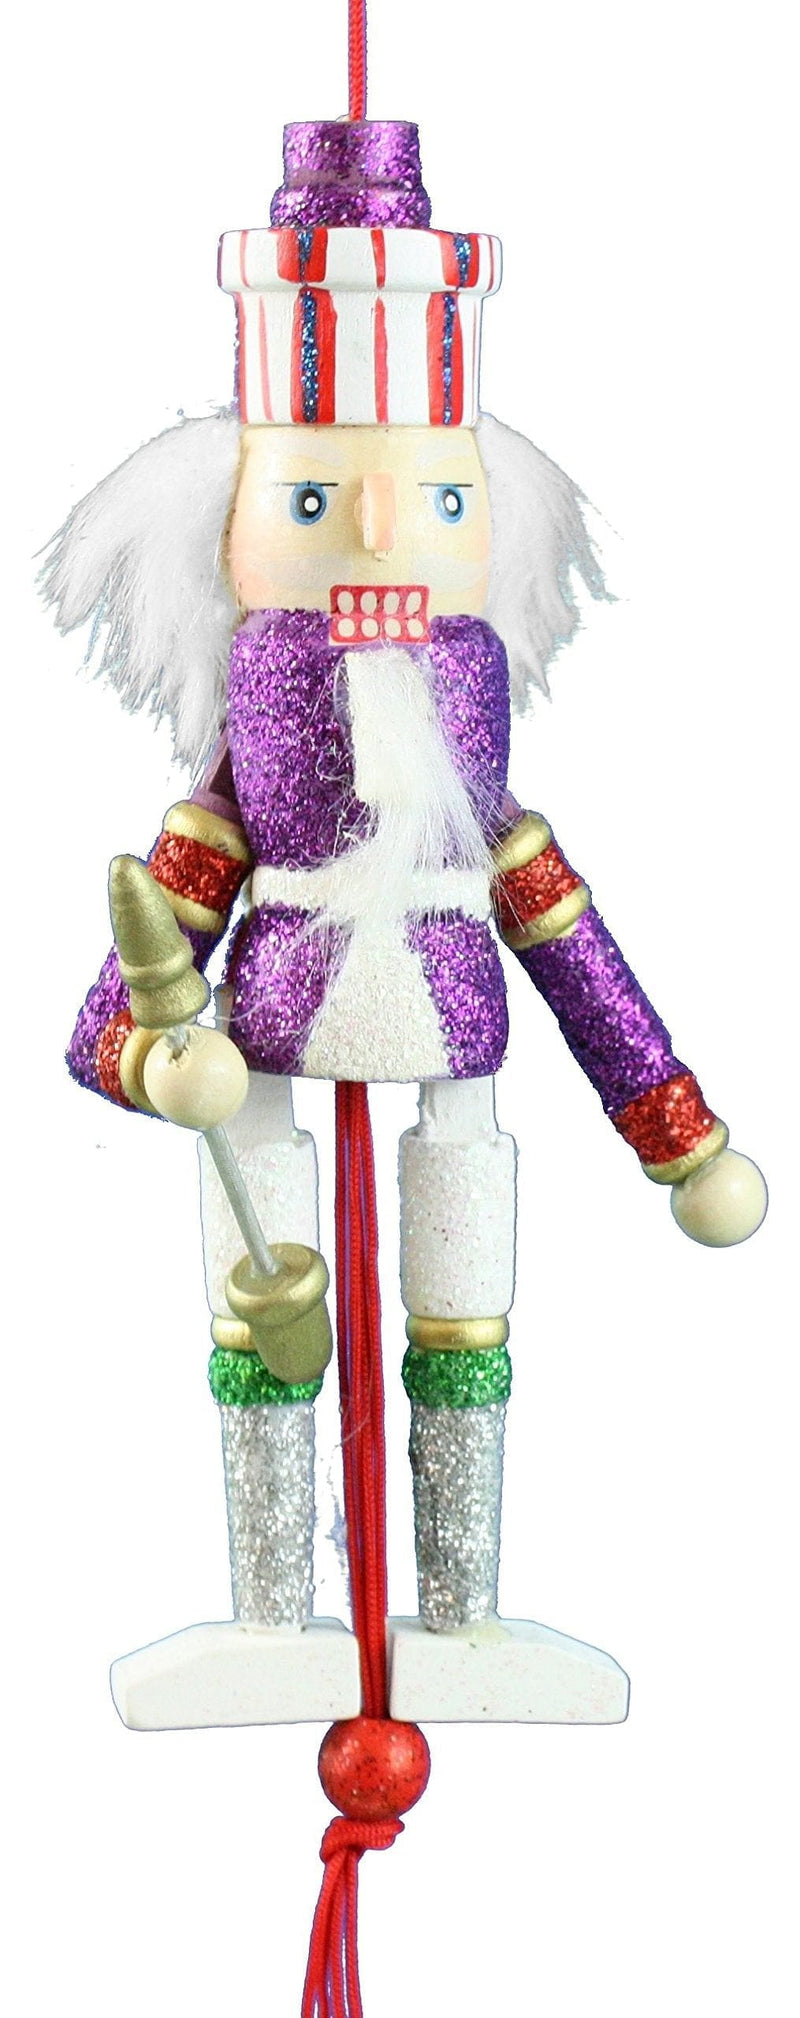 5 inch Wooden Pull Puppet Nutcracker Ornament - Blue - Shelburne Country Store